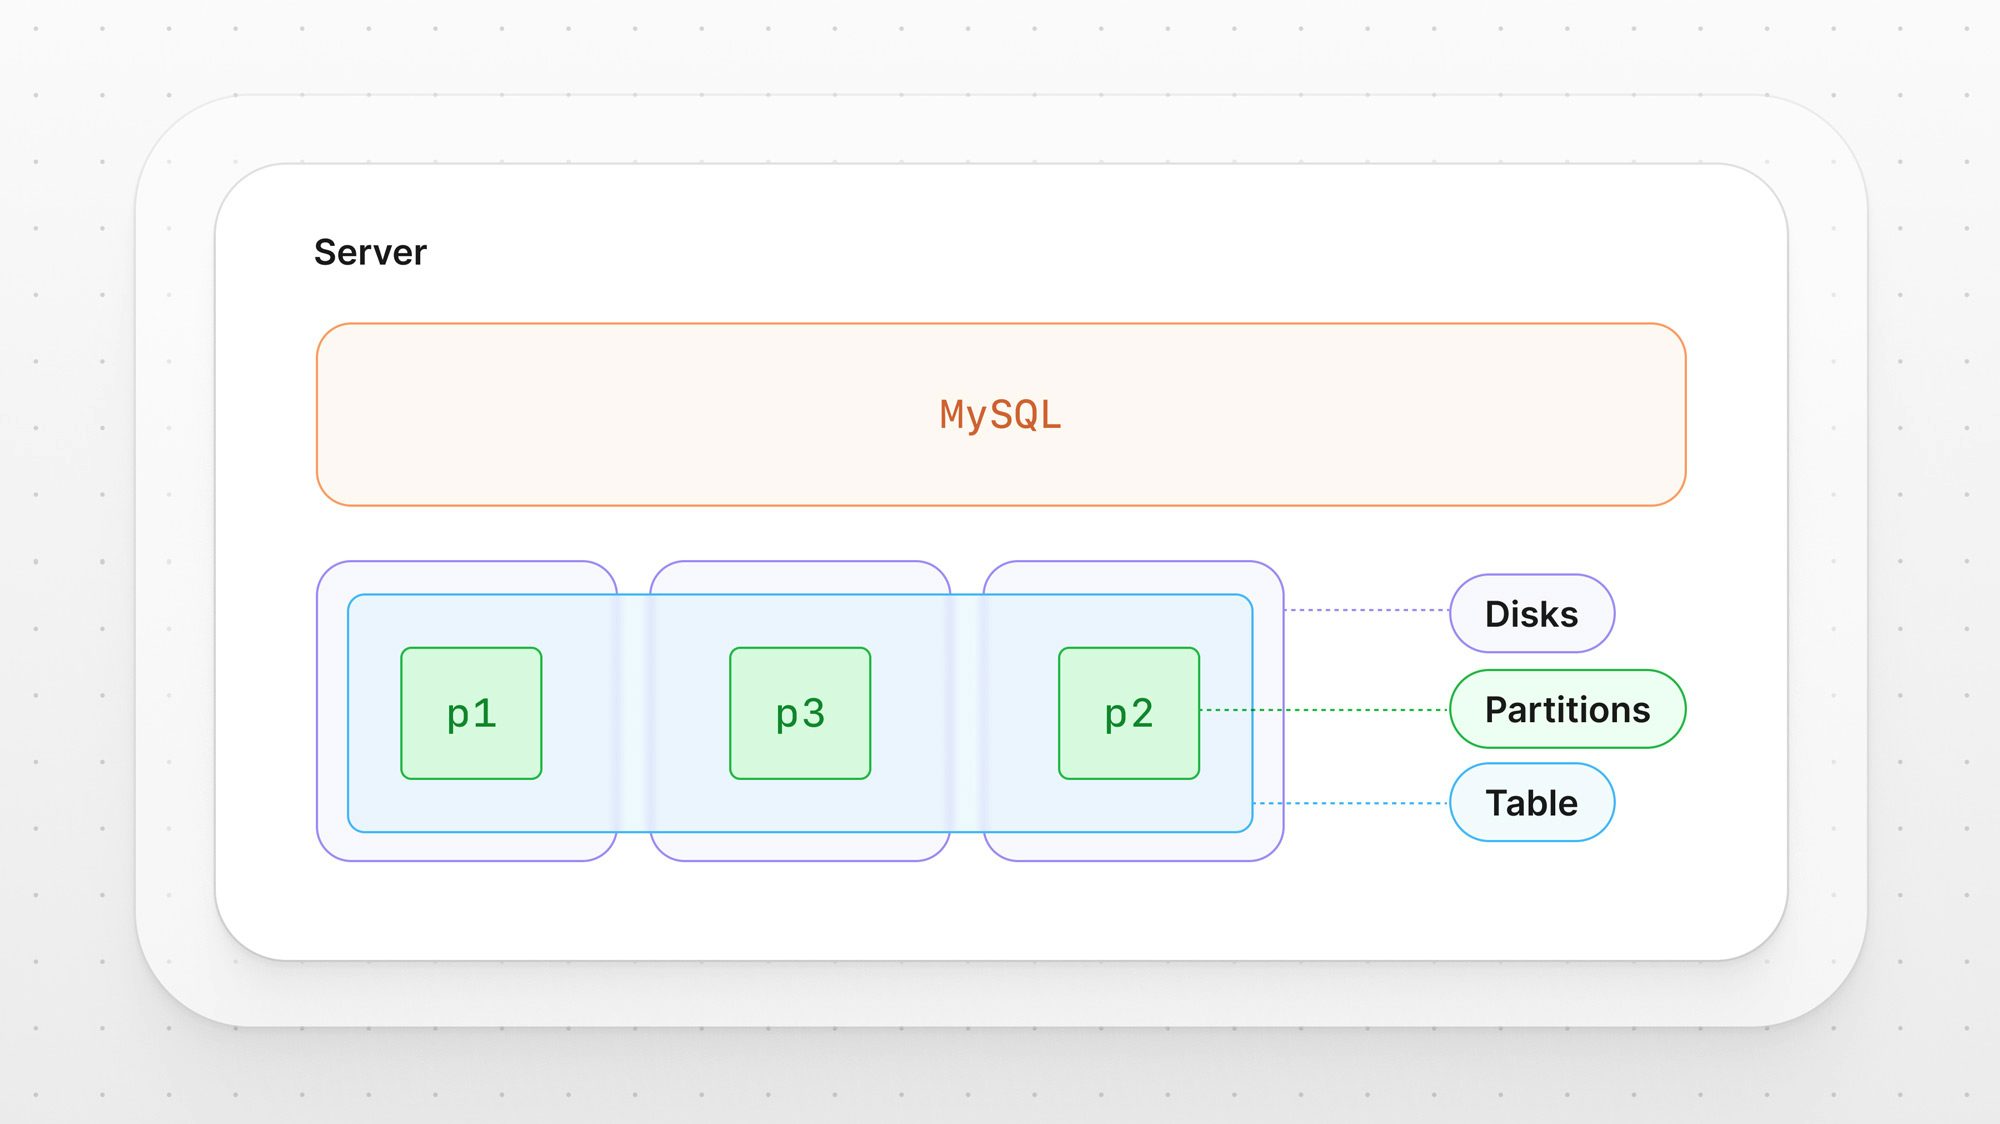 What is MySQL partitioning?